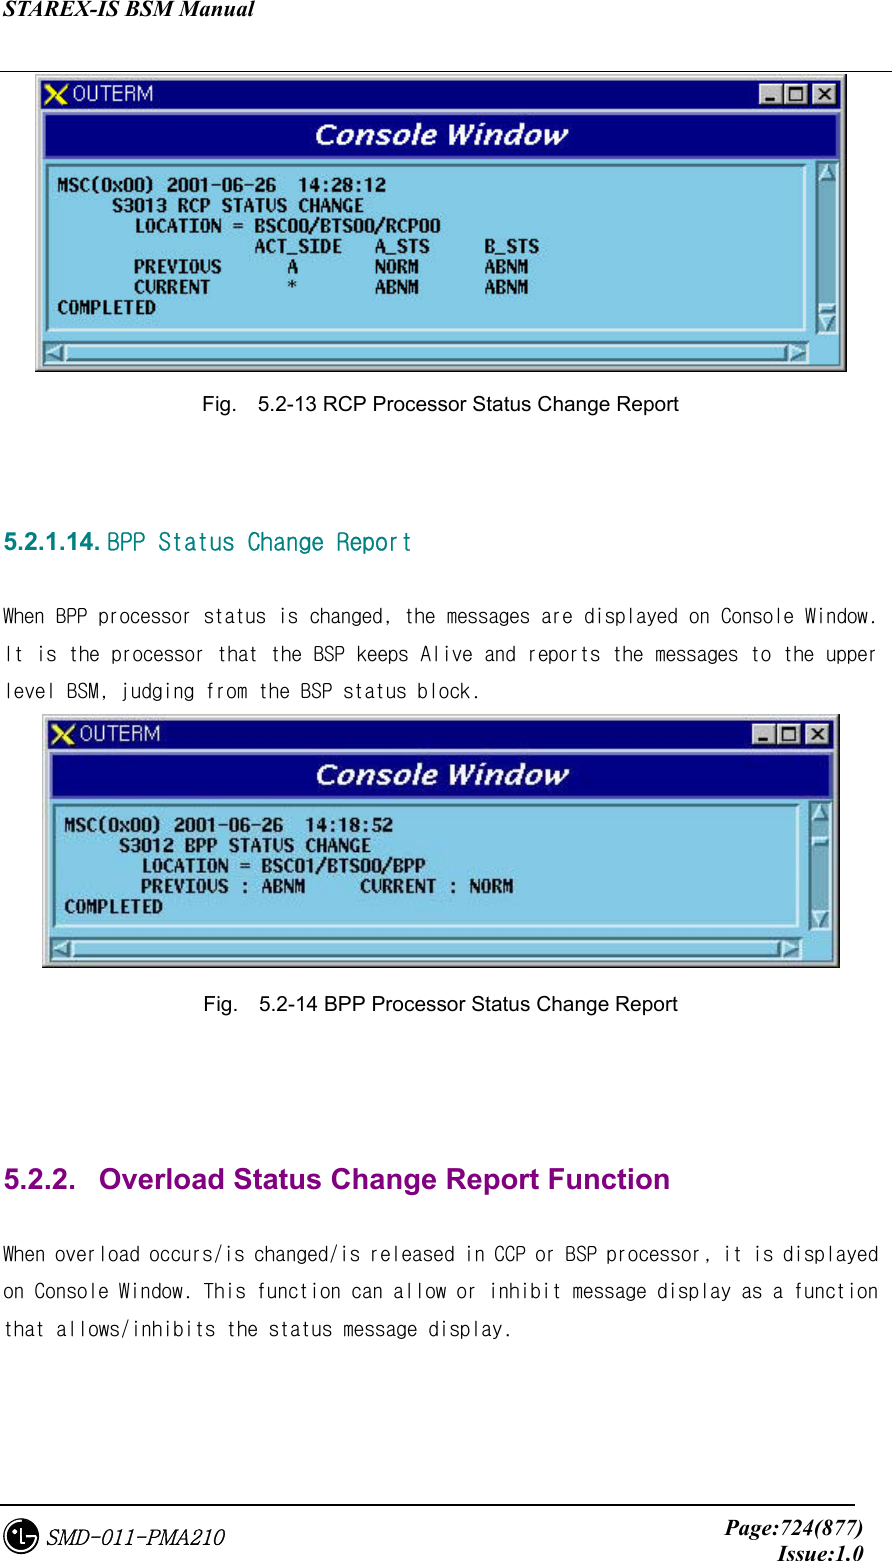 STAREX-IS BSM Manual     Page:724(877)Issue:1.0SMD-011-PMA210  Fig.    5.2-13 RCP Processor Status Change Report   5.2.1.14. BPP Status Change Report  When BPP processor status is changed, the messages are displayed on Console Window. It is the processor that the BSP keeps Alive and reports the messages to the upper level BSM, judging from the BSP status block.  Fig.    5.2-14 BPP Processor Status Change Report    5.2.2.   Overload Status Change Report Function  When overload occurs/is changed/is released in CCP or BSP processor, it is displayed  on Console Window. This function can allow or inhibit message display as a function that allows/inhibits the status message display.   